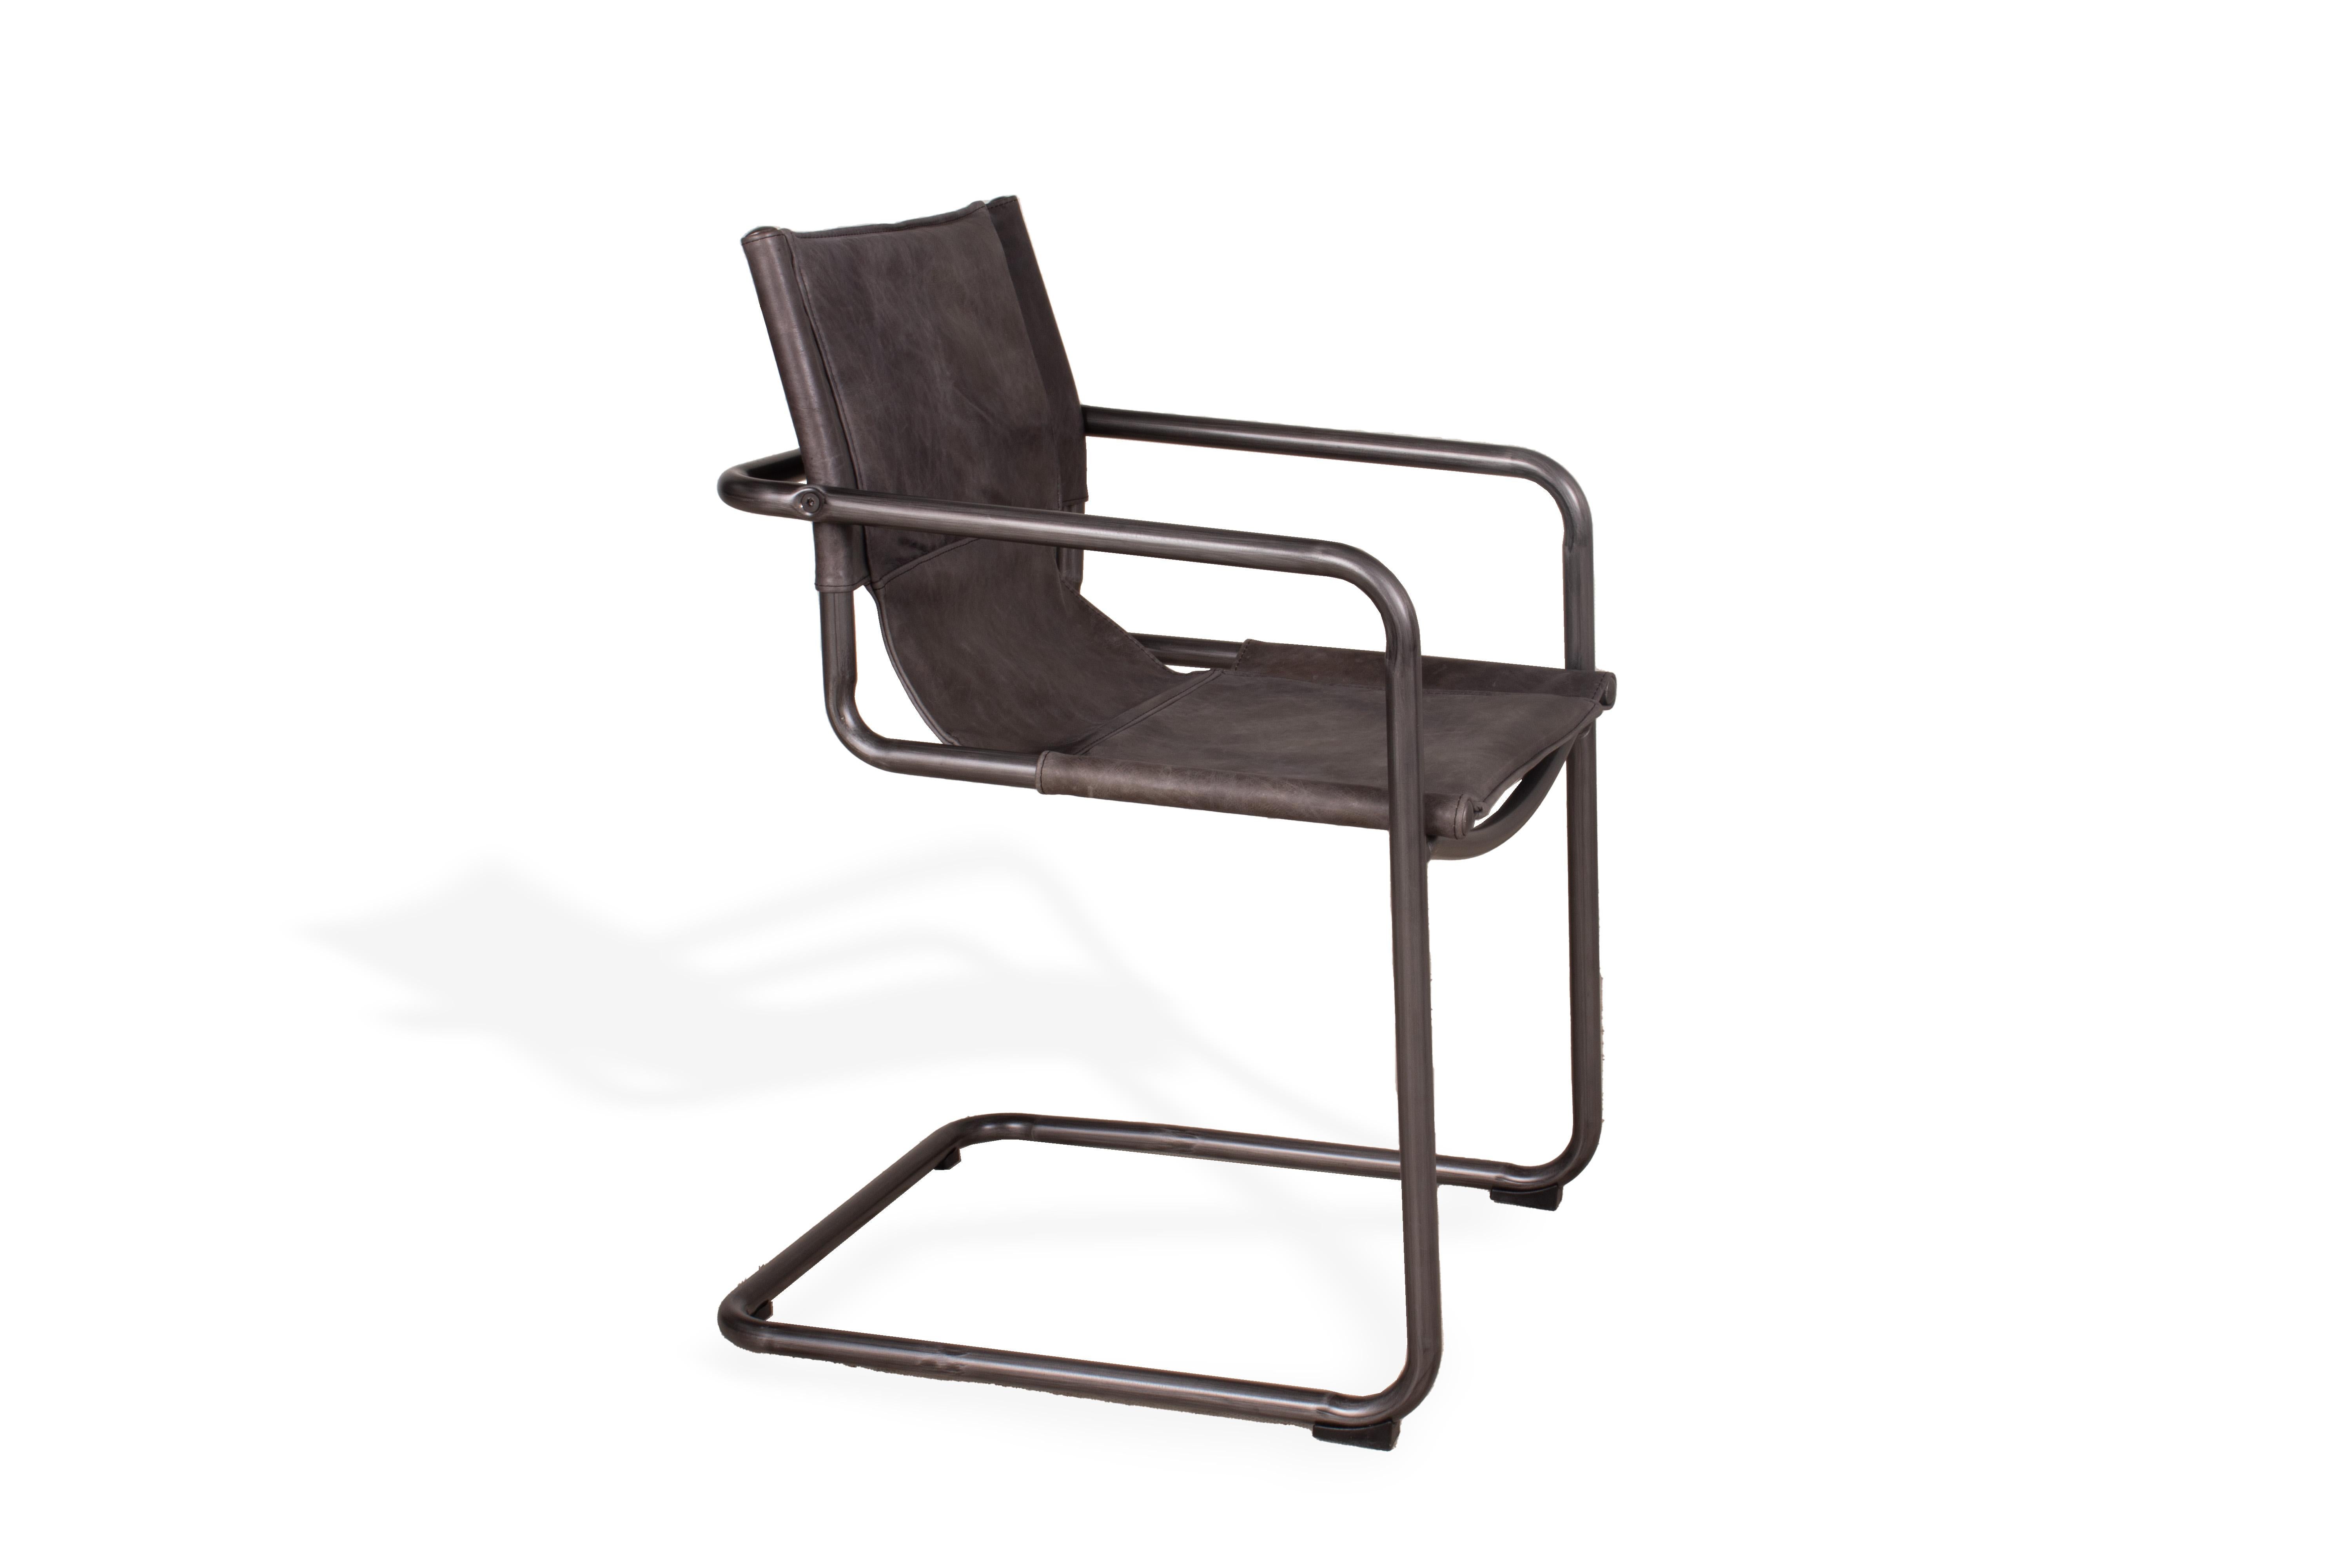 European Leather and Steel Sling Dining Chair